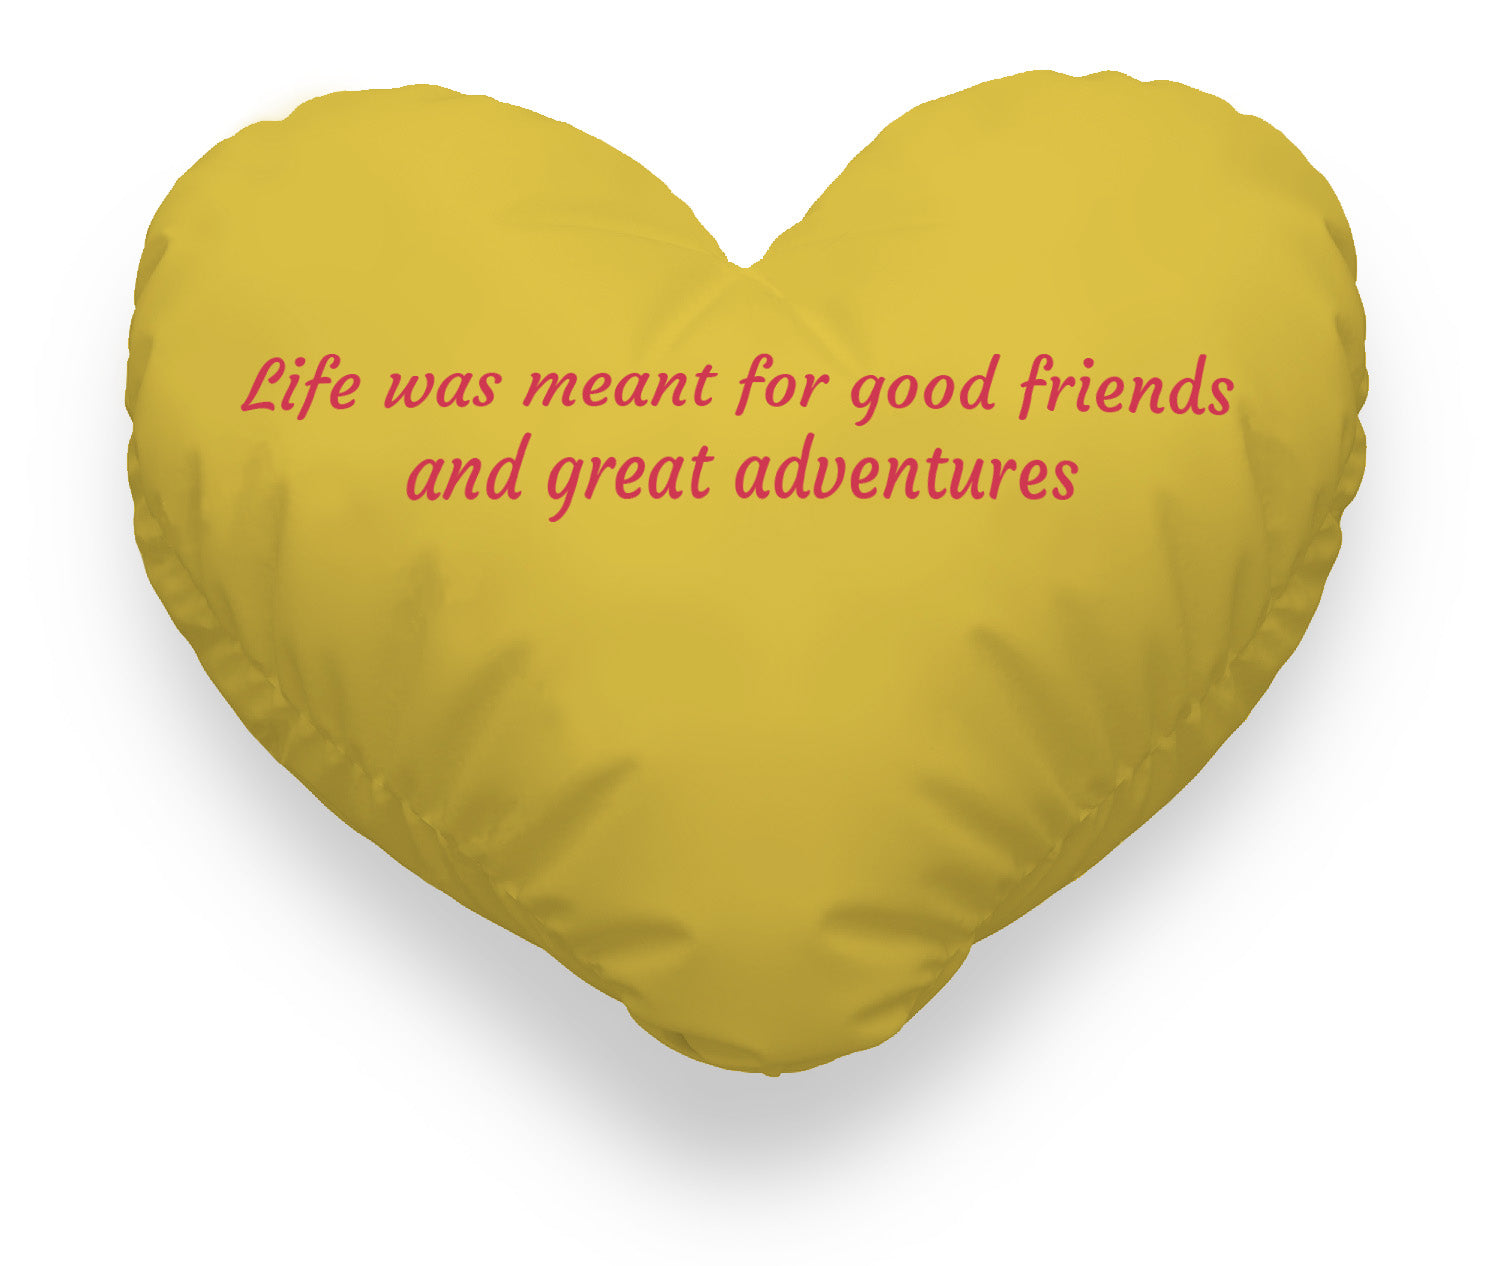 blue heart cushion. yellow text "life was meant for good friends and great adventures".